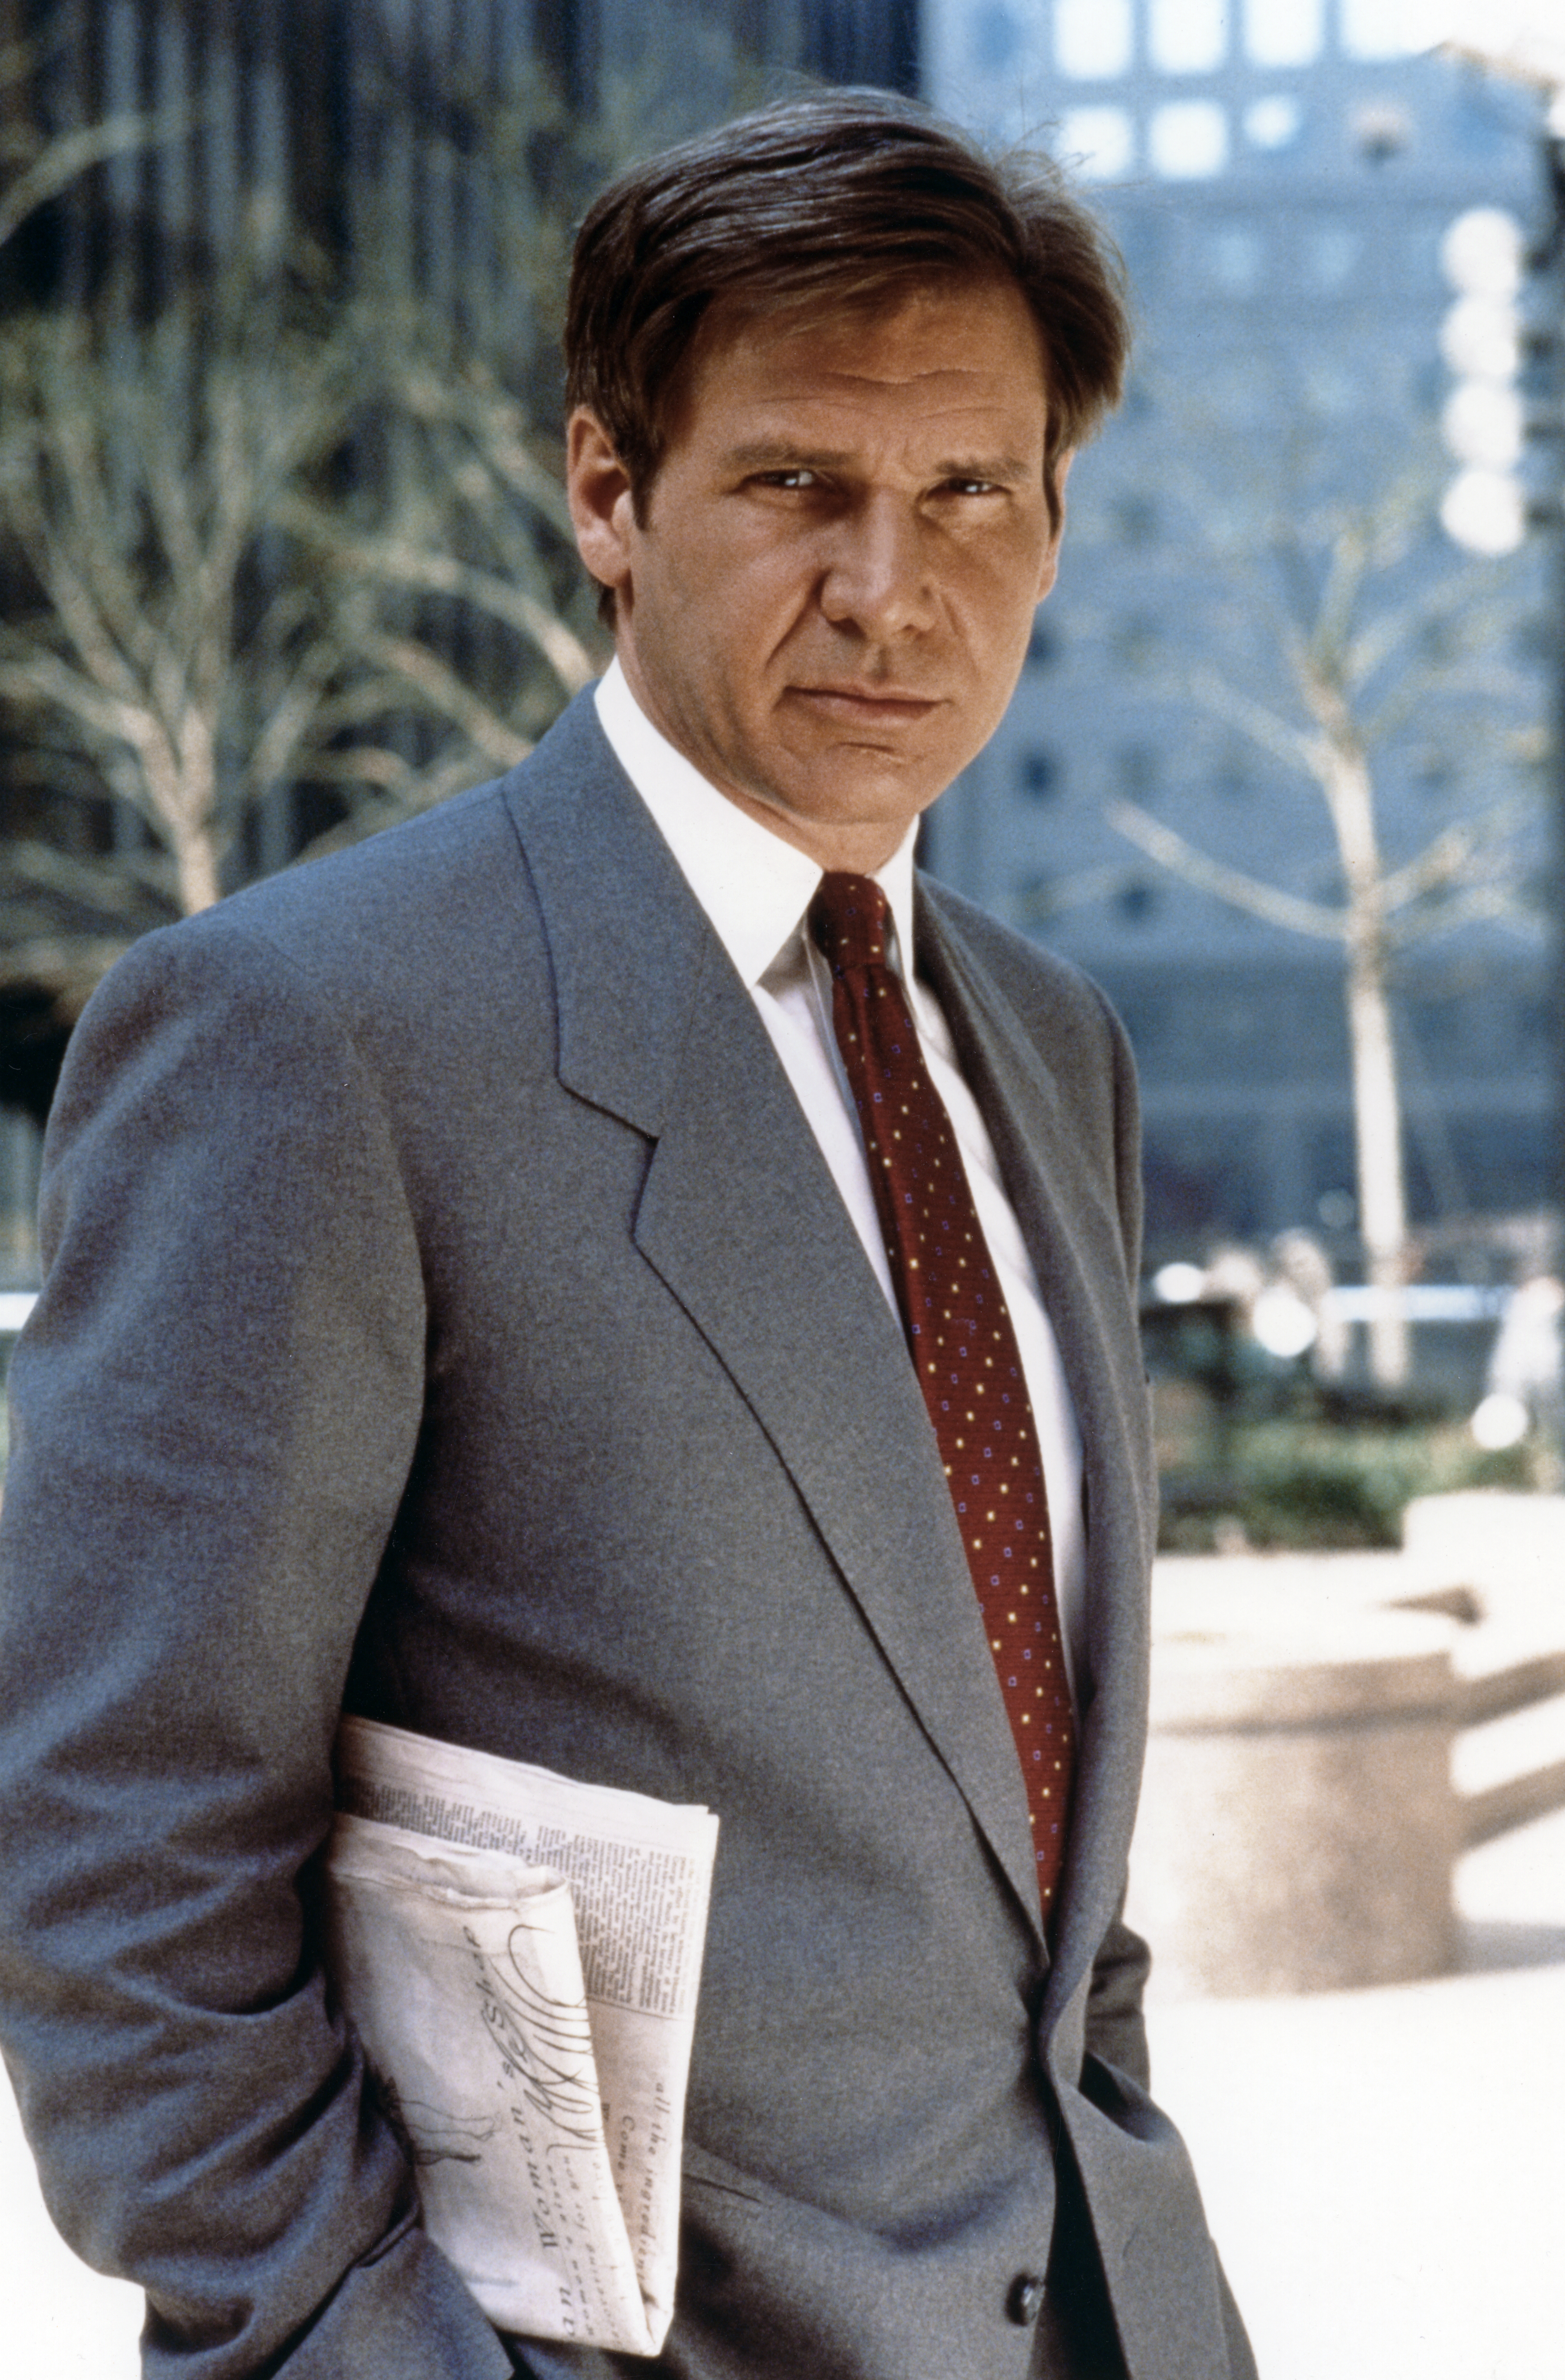 Harrison Ford dans "Working Girl", 1988 | Source : Getty Images